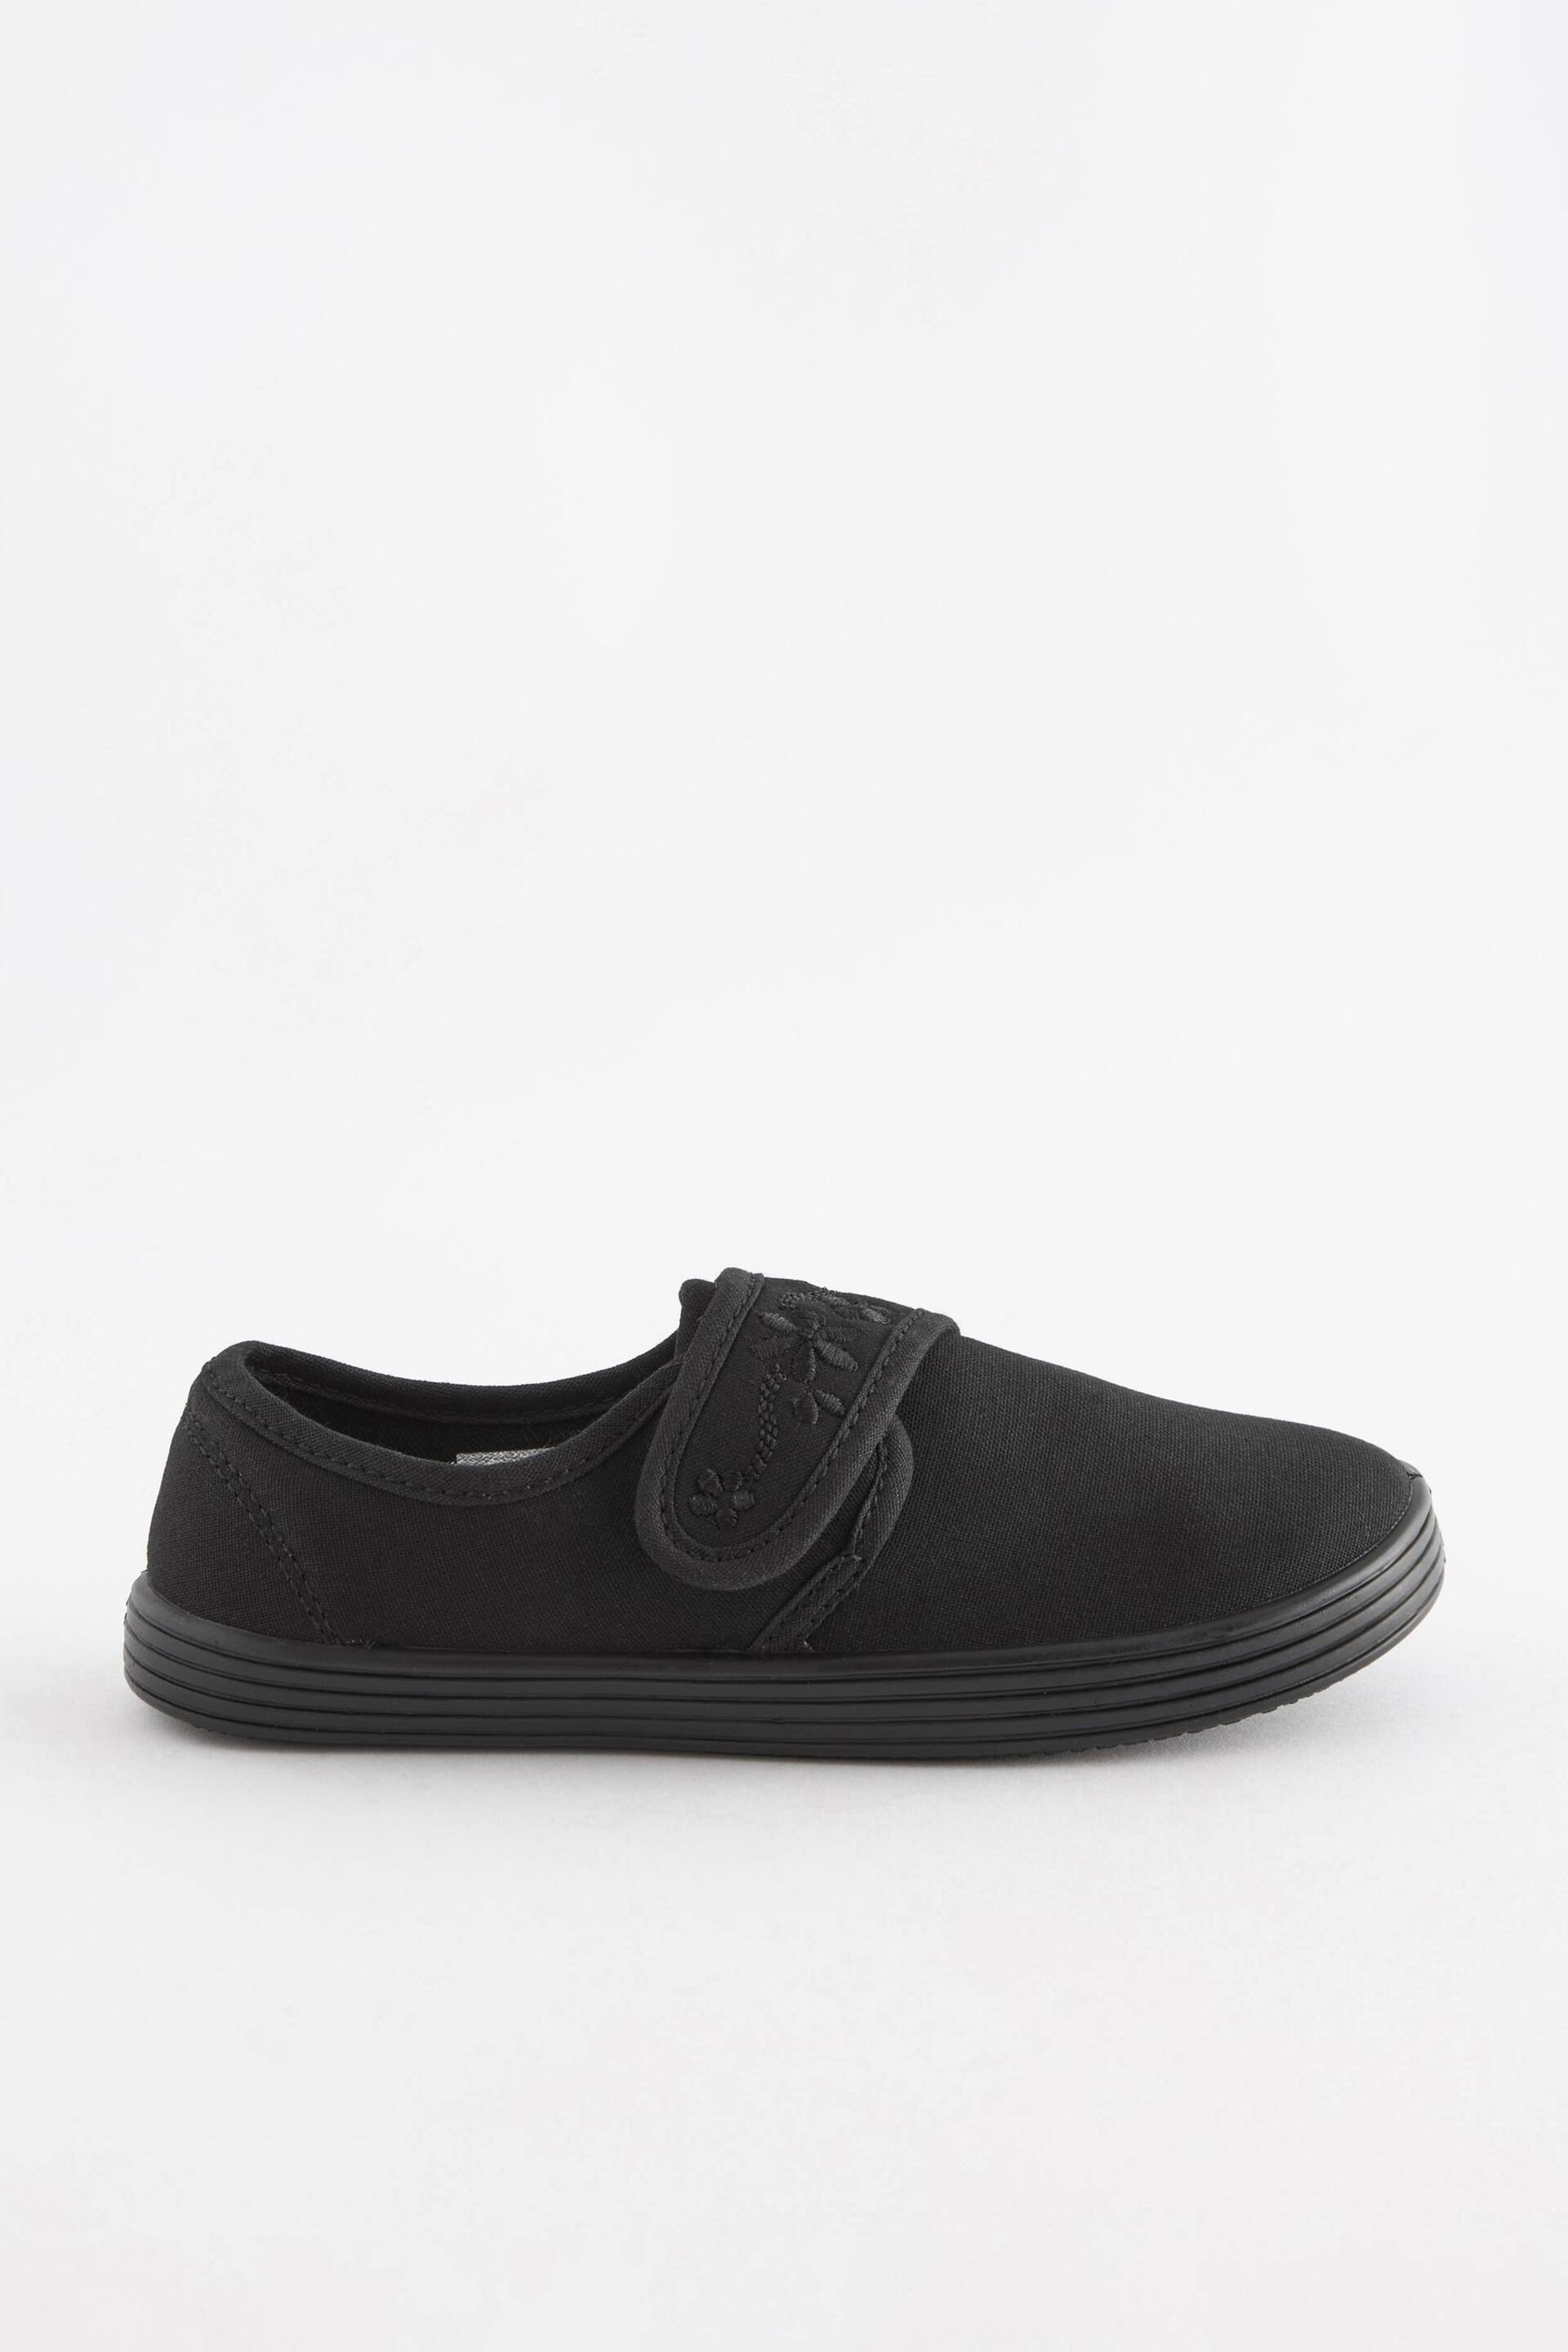 Black Wide Fit (G) Embroidered Strap School Plimsolls - Image 2 of 5